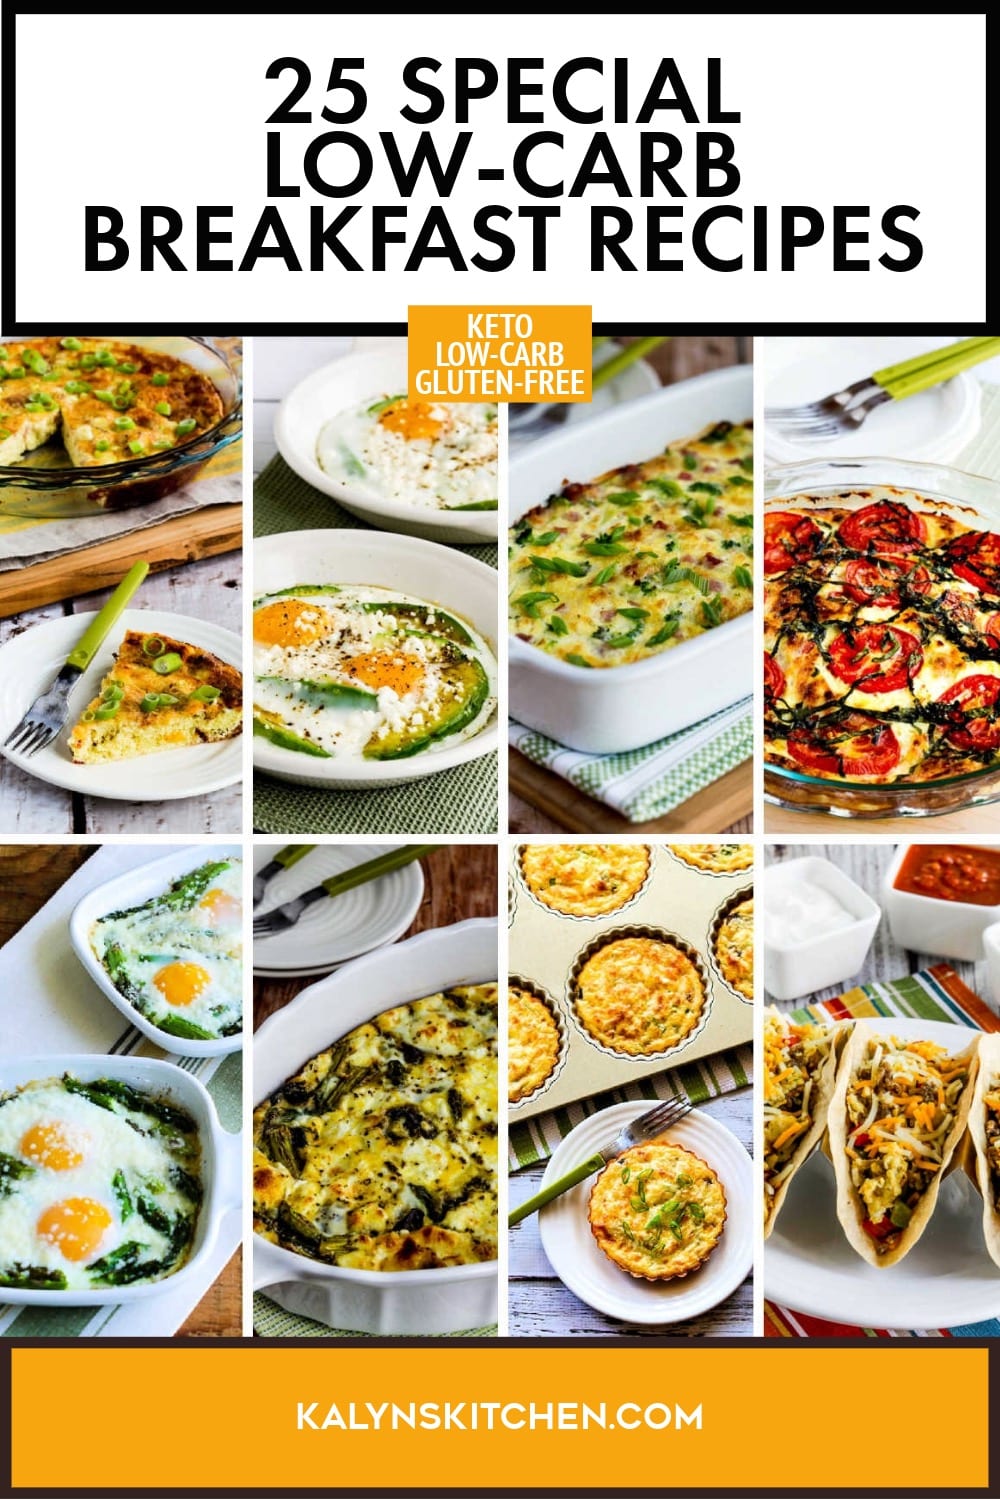 Pinterest image of 25 Special Low-Carb Breakfast Recipes